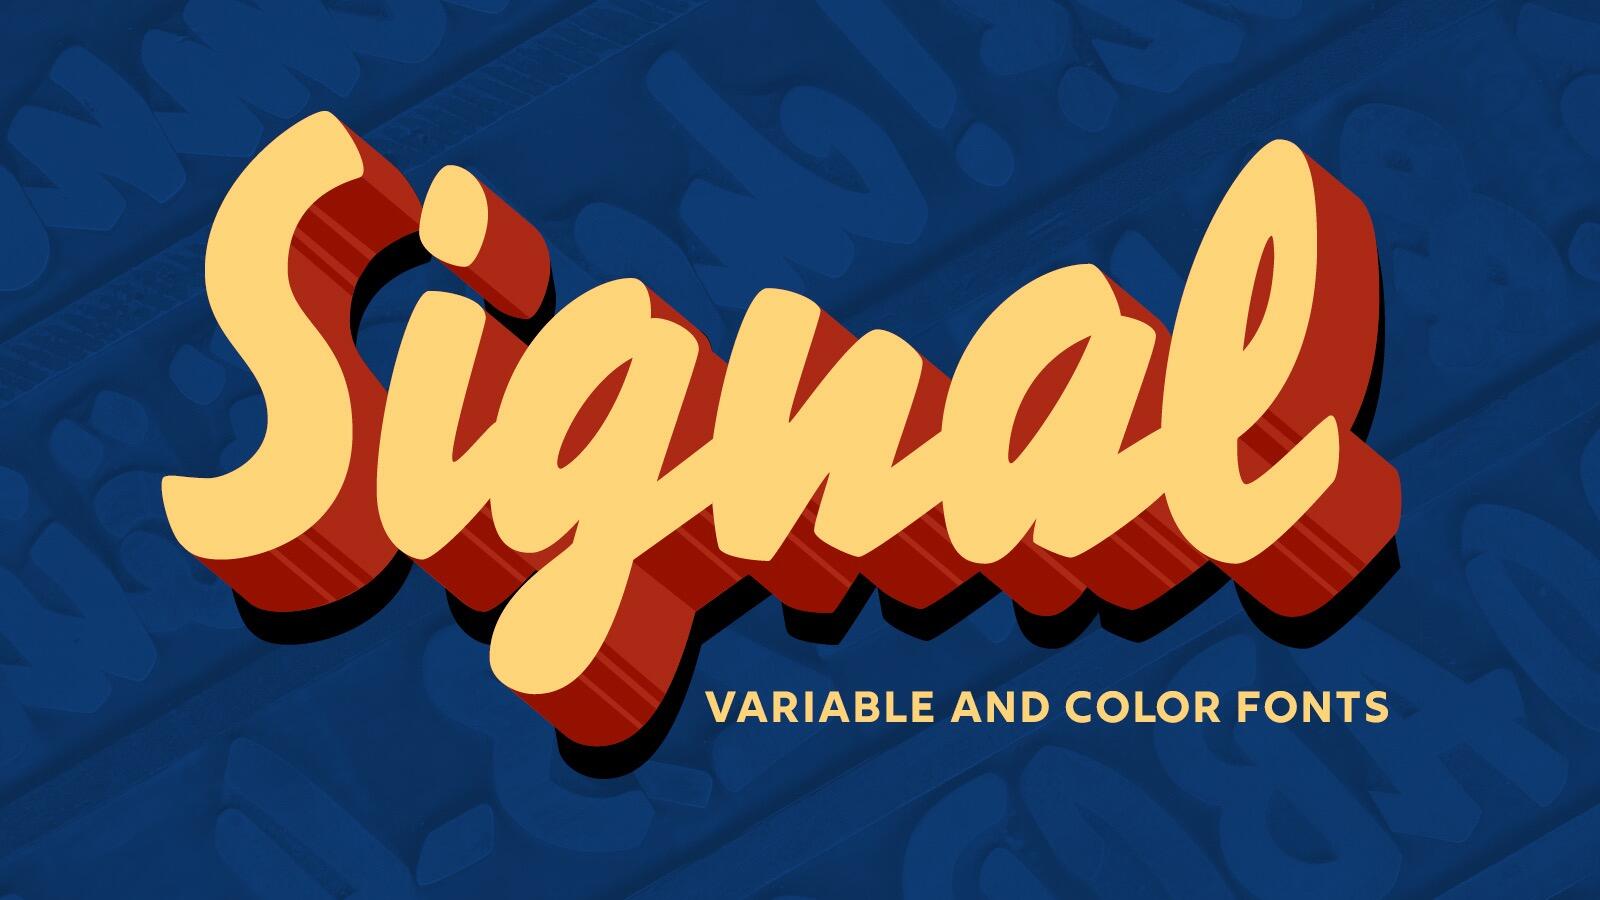 More information about "On Kickstarter: Signal variable and color fonts"